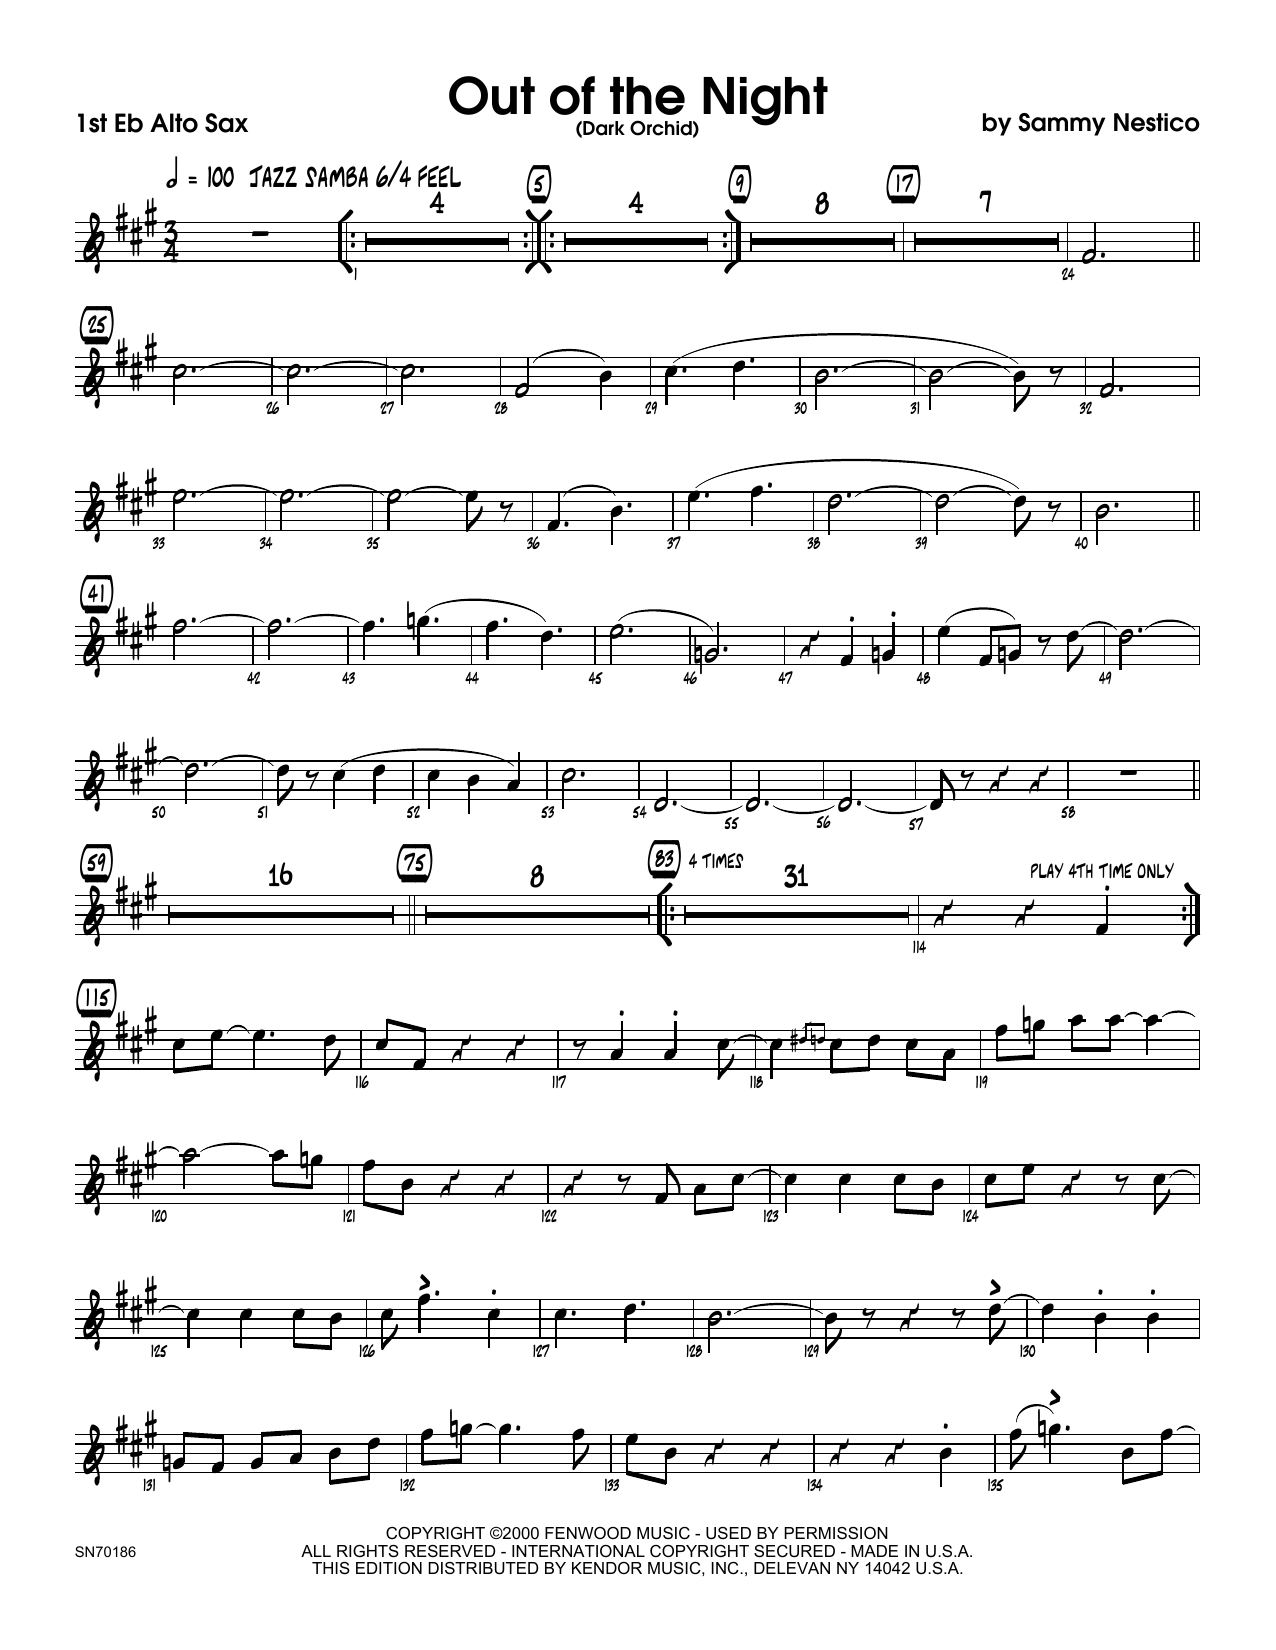 Download Sammy Nestico Out of the Night - 1st Eb Alto Saxophon Sheet Music